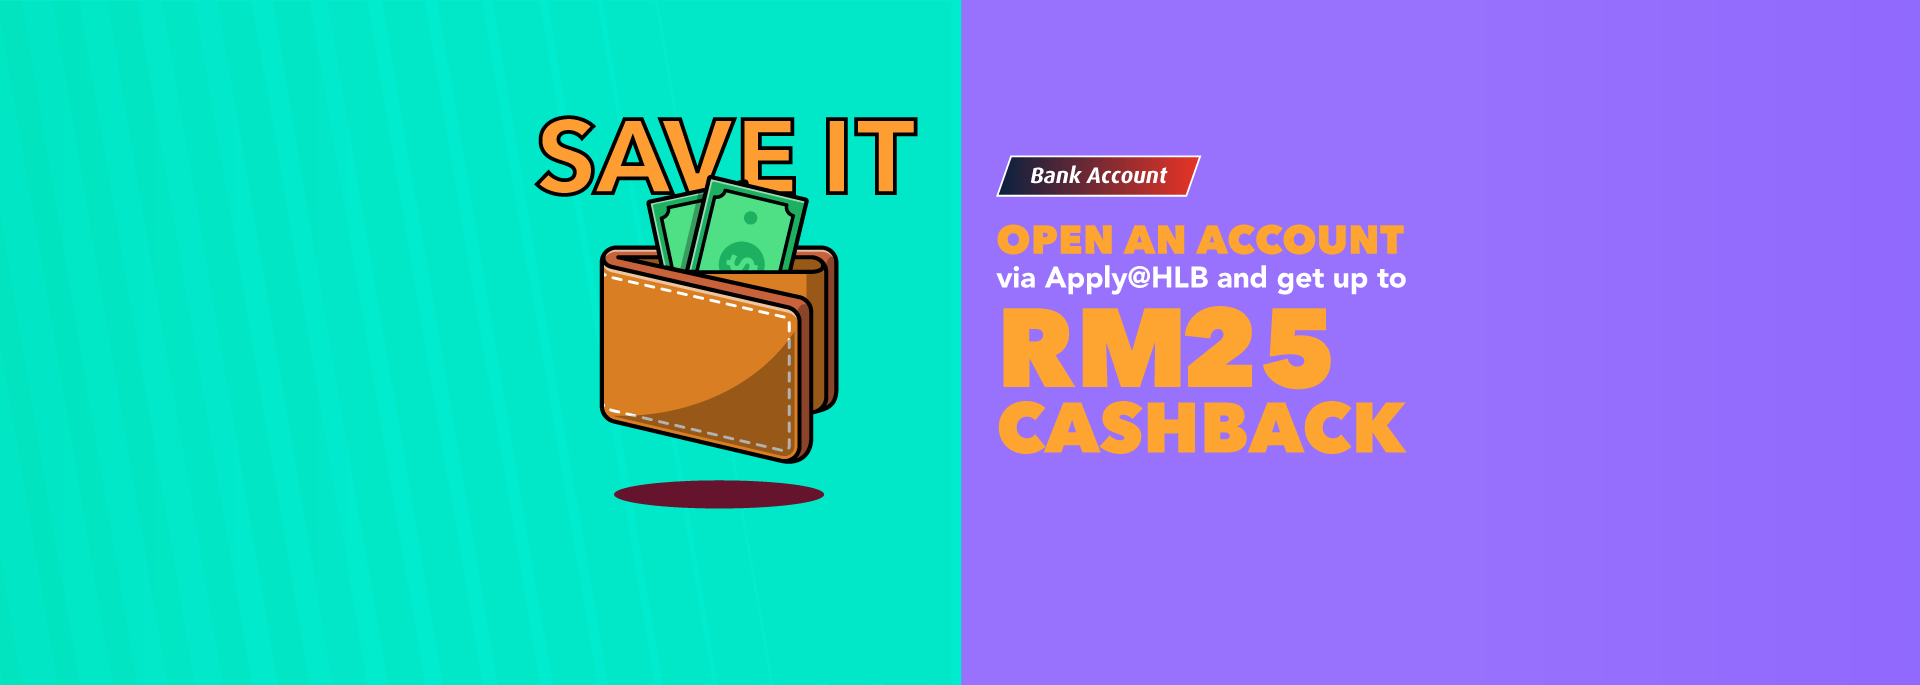 Open an account via Apply@HLB and get up to RM25 Cashback